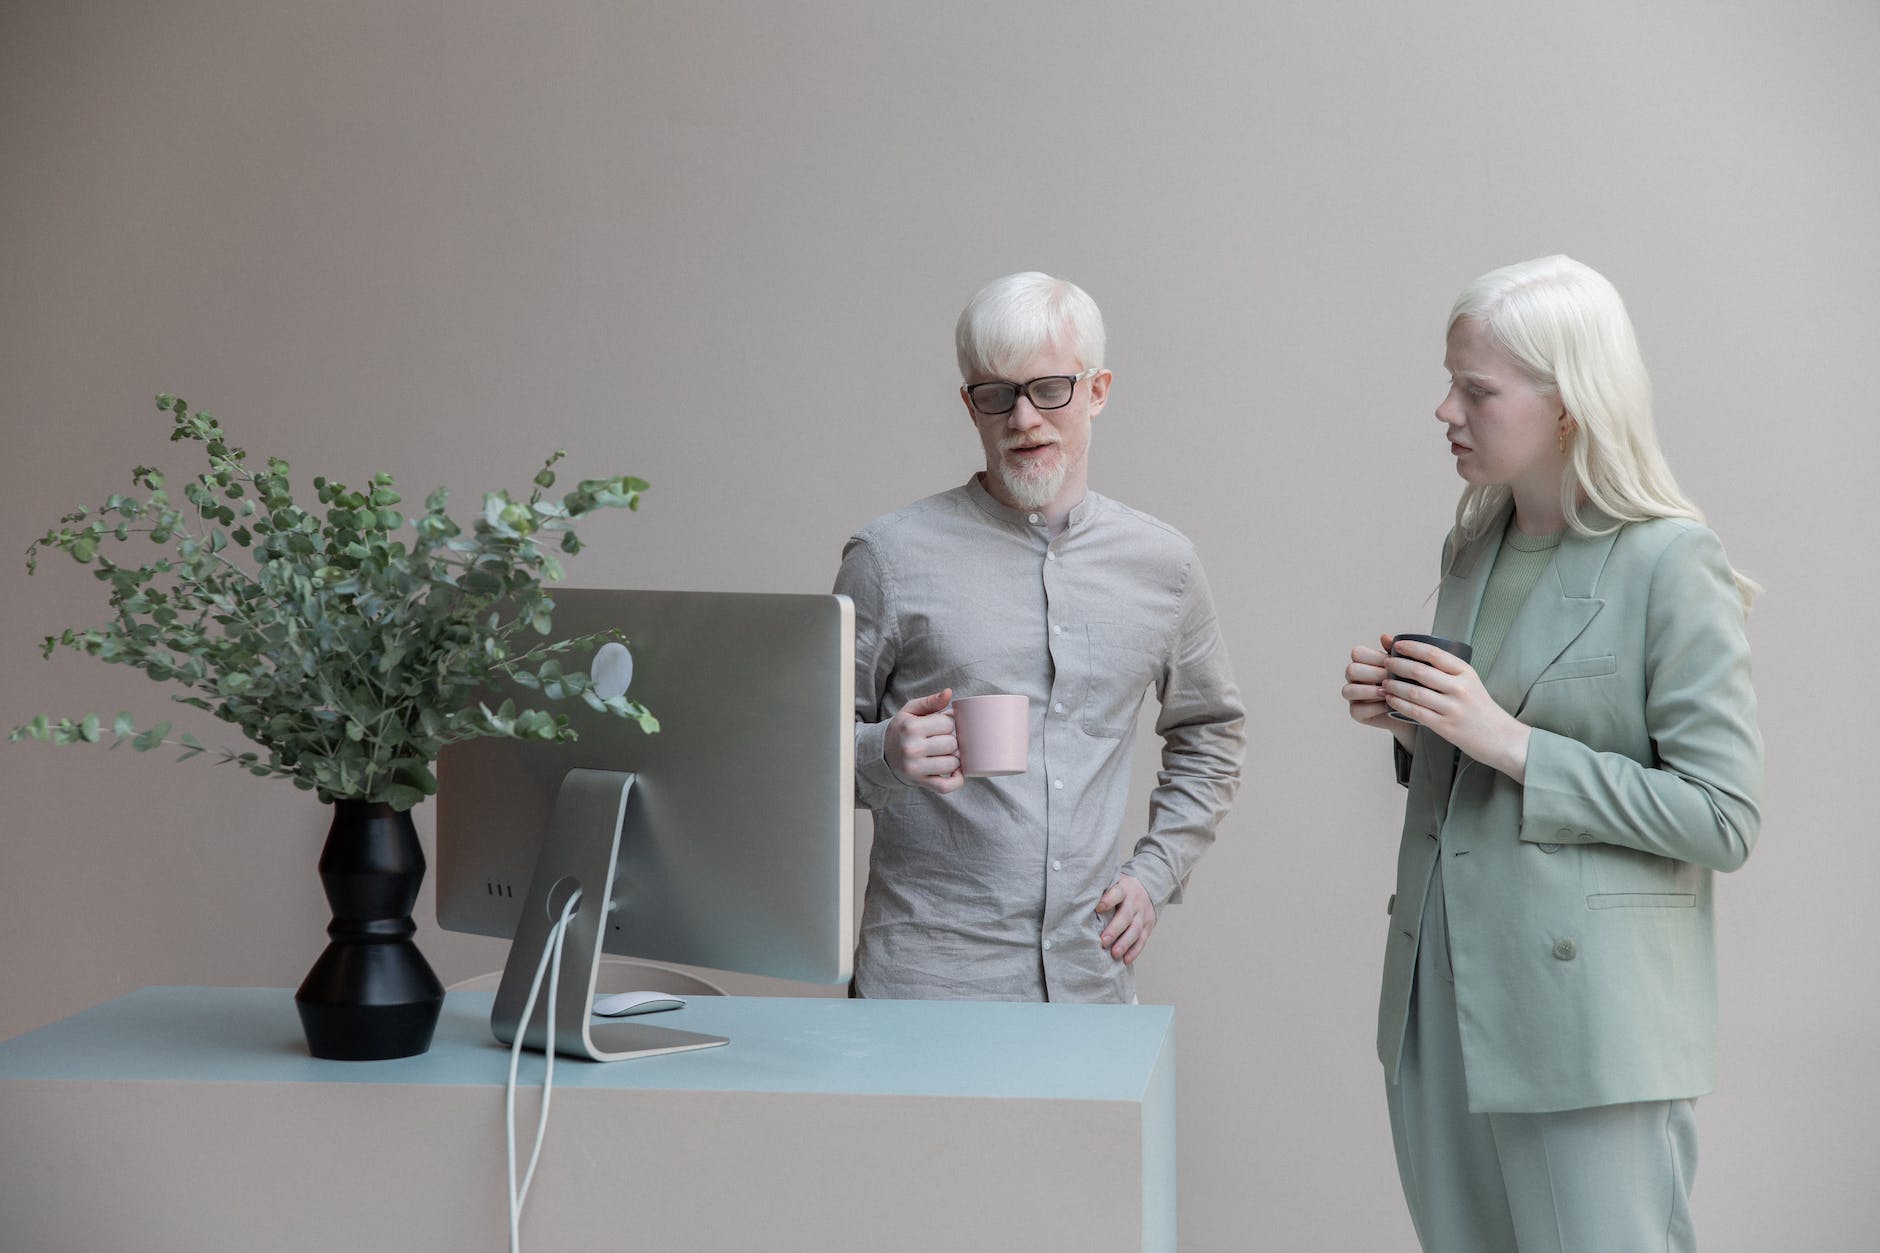 albino coworkers standing near computer in office